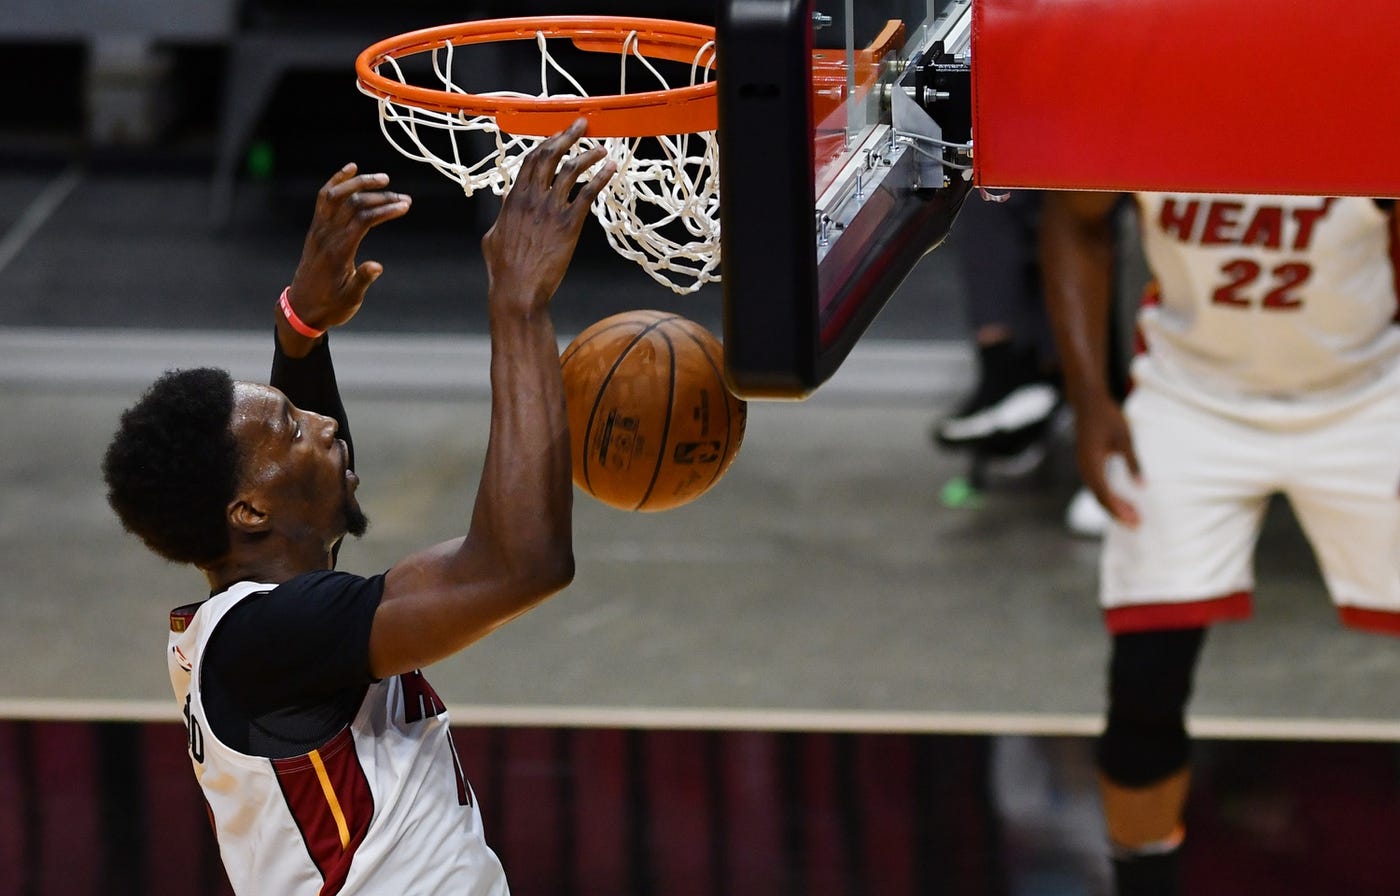 Apr 3, 2021; Miami, Florida, USA; Miami Heat center Bam Adebayo (13) dunks during the third quarter of a game against the Cleveland Cavaliers at American Airlines Arena. Mandatory Credit: Mary Holt-USA TODAY Sports